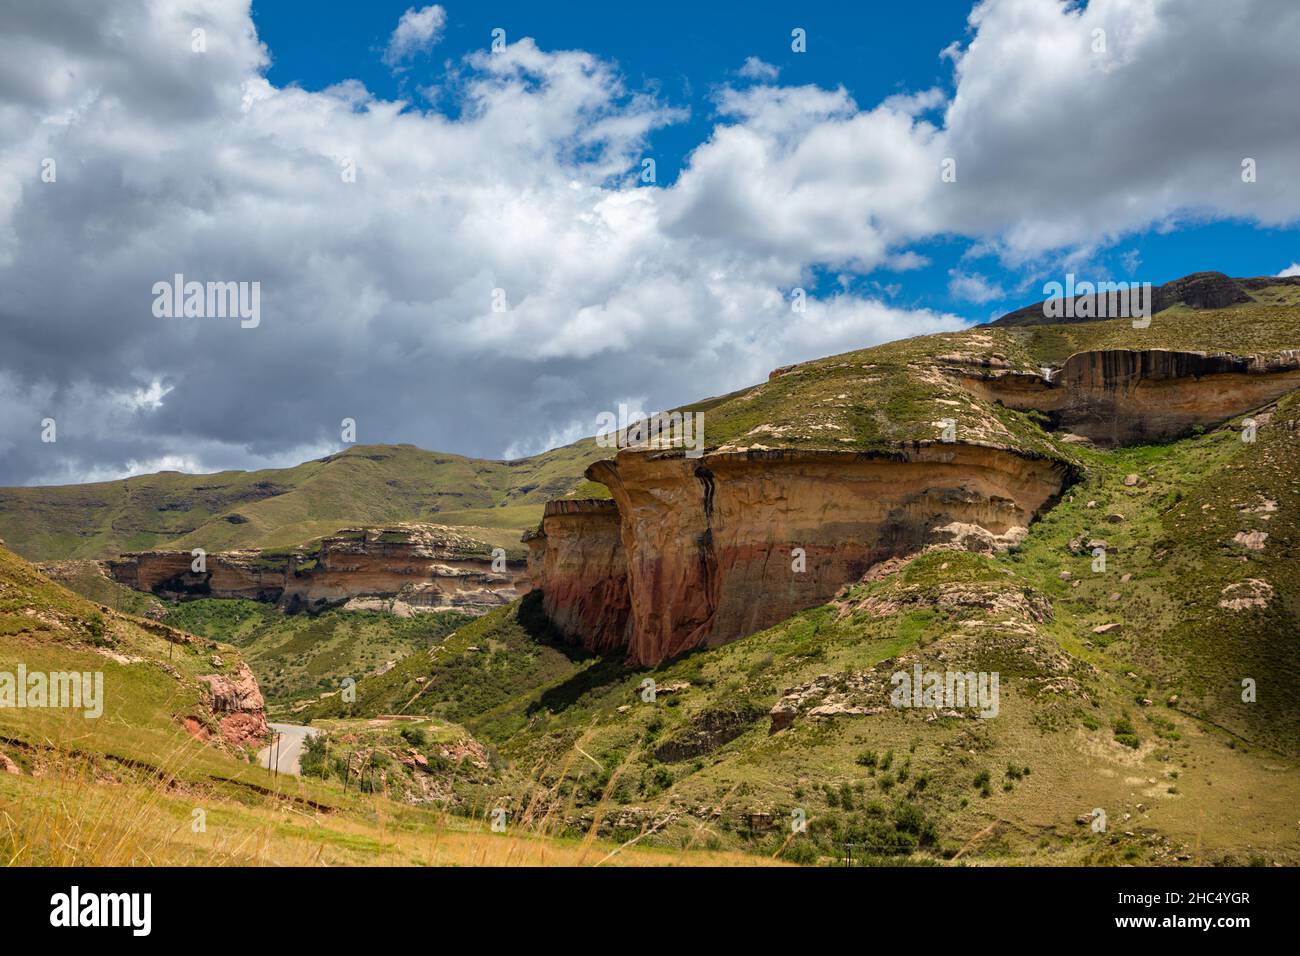 Sandstone mountains of the Golden gate Highland National park in the Freestate province, South Africa Stock Photo